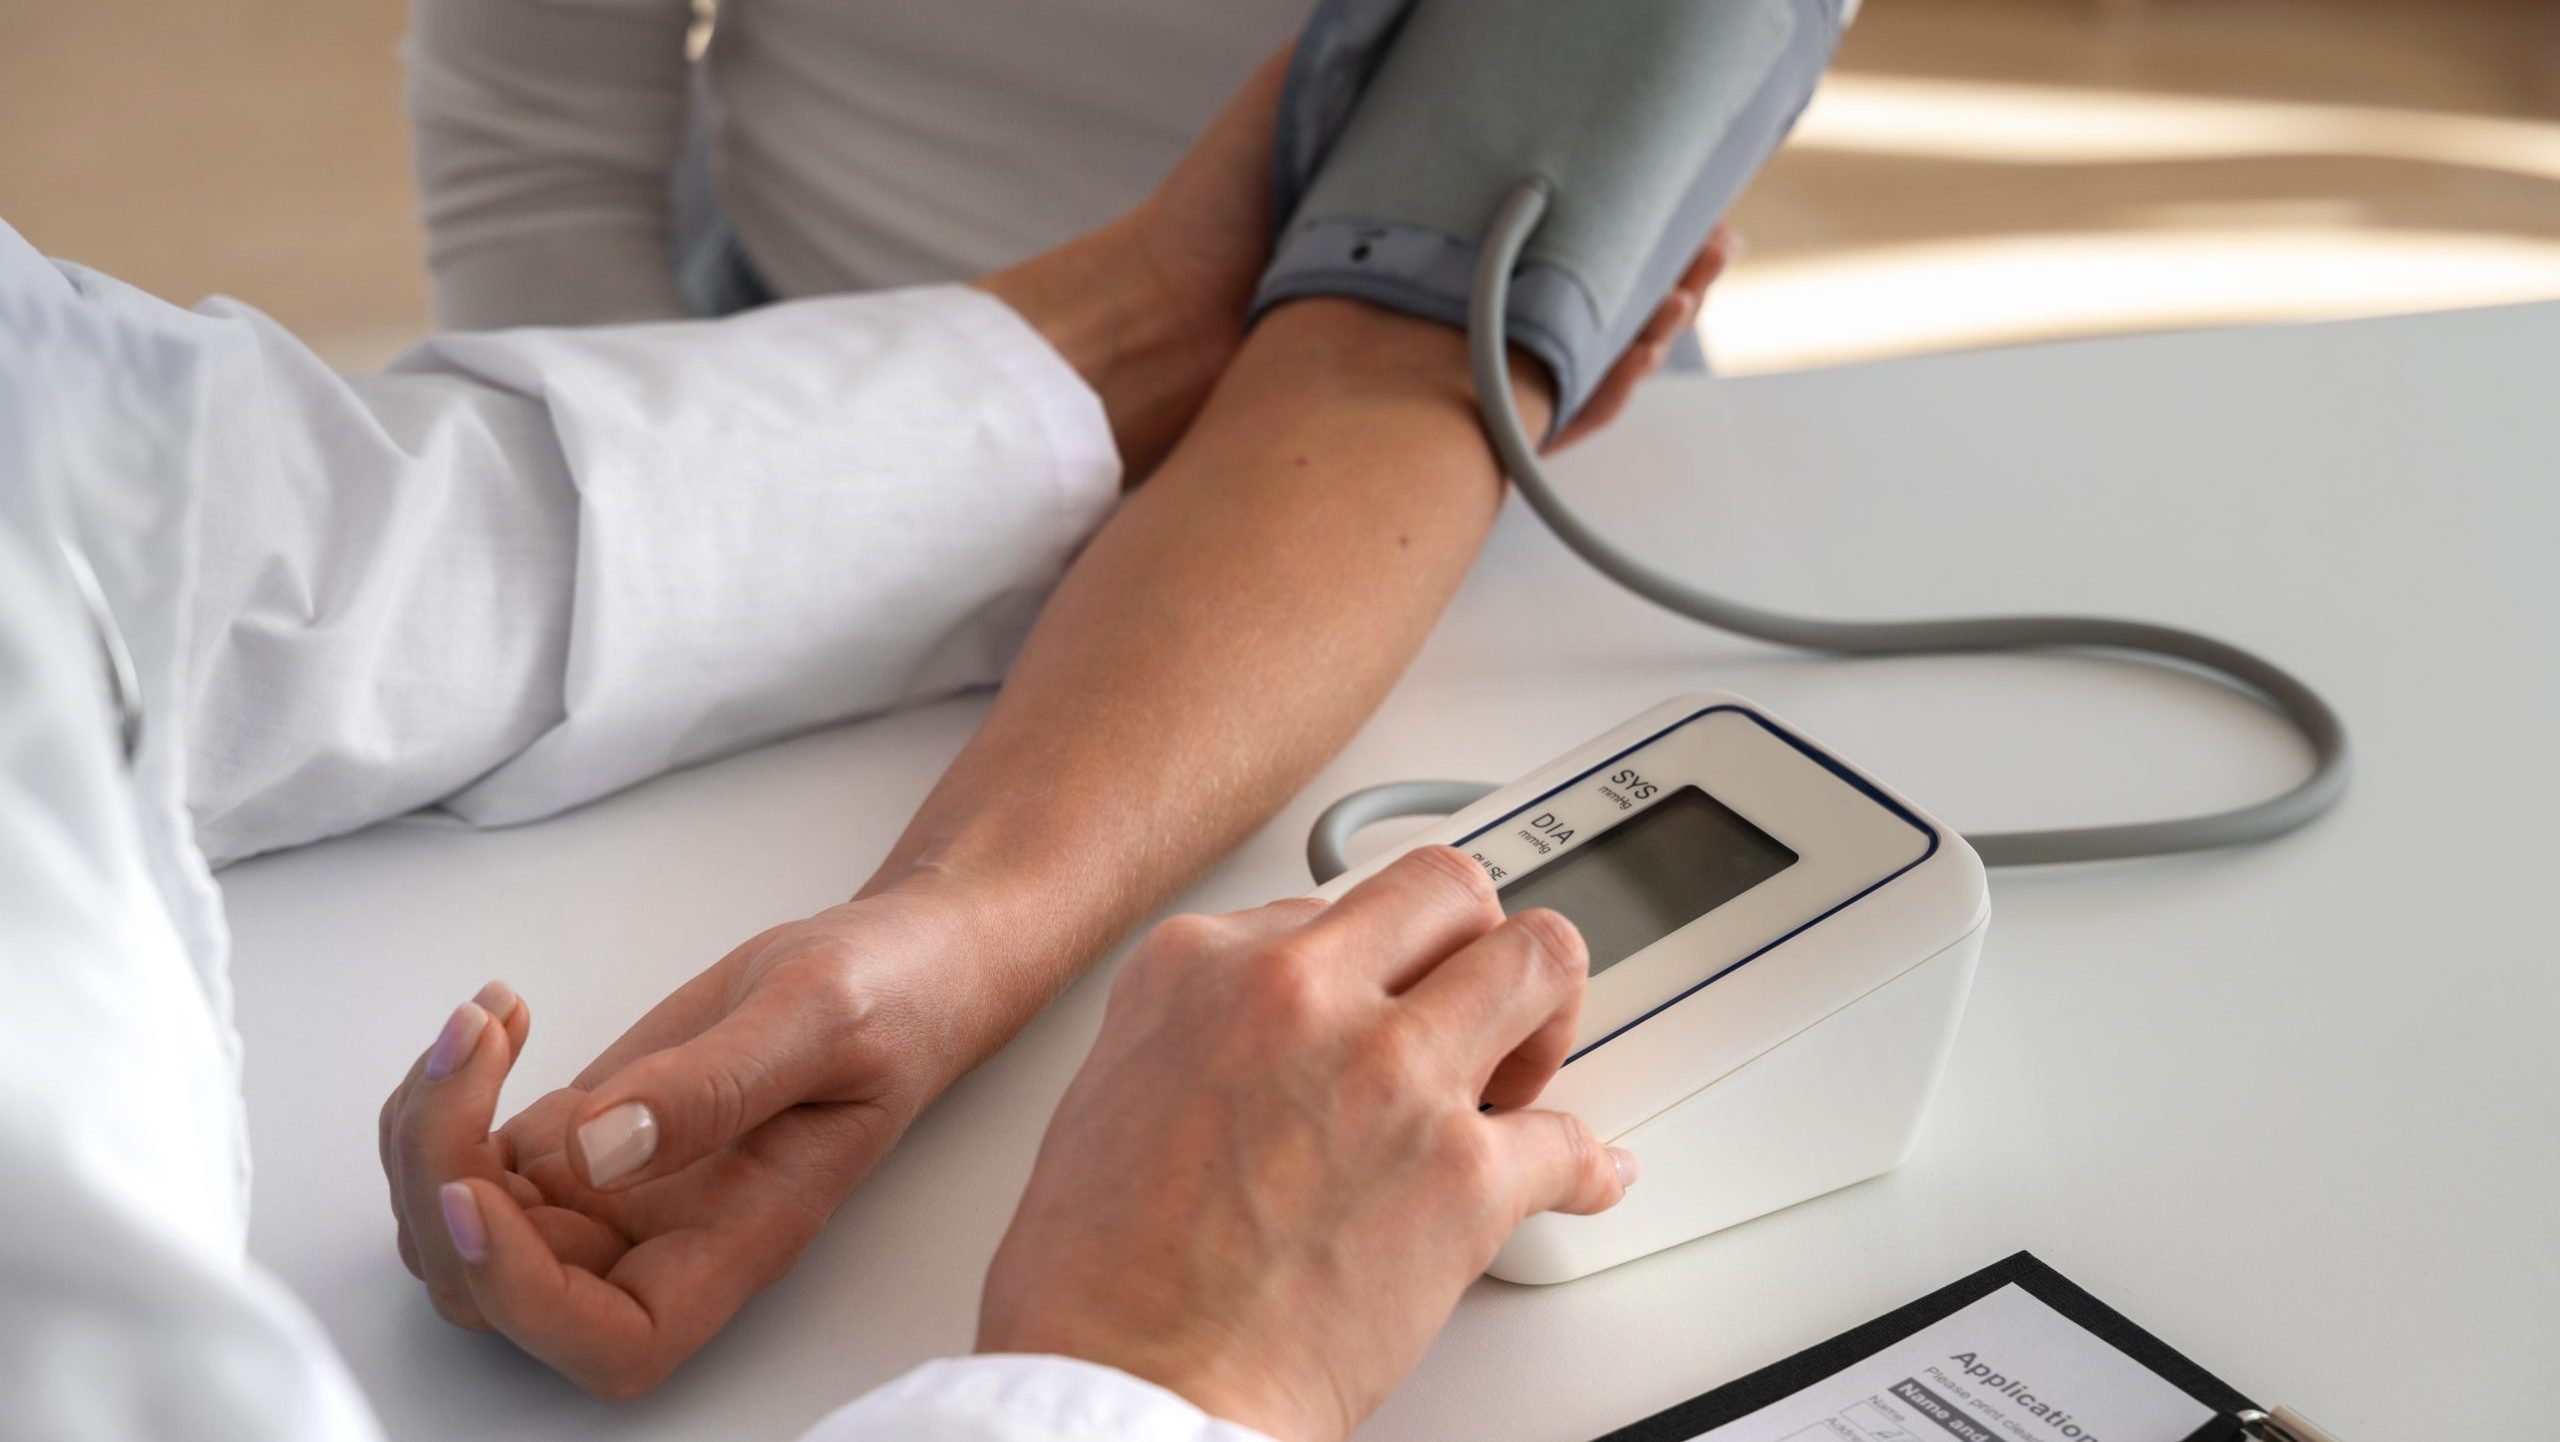 person getting her blood pressure checked, Effective High Blood Pressure Control Reduces Dementia Risk